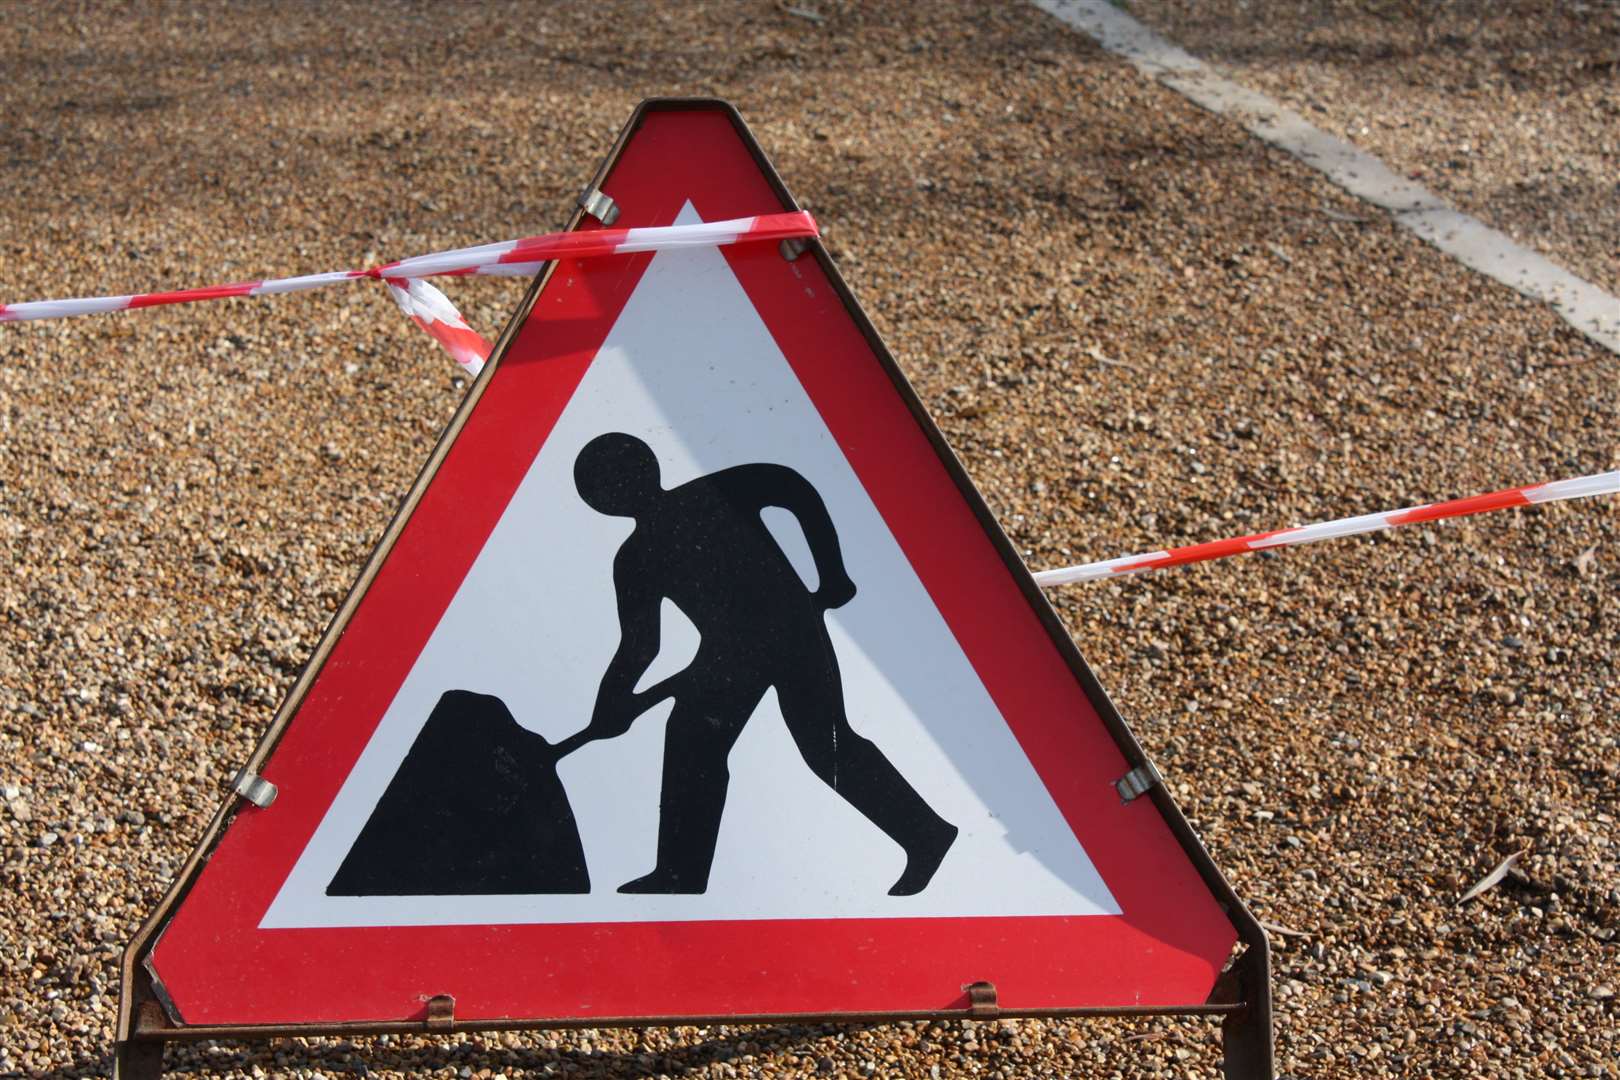 The roadworks will last at least another fortnight.